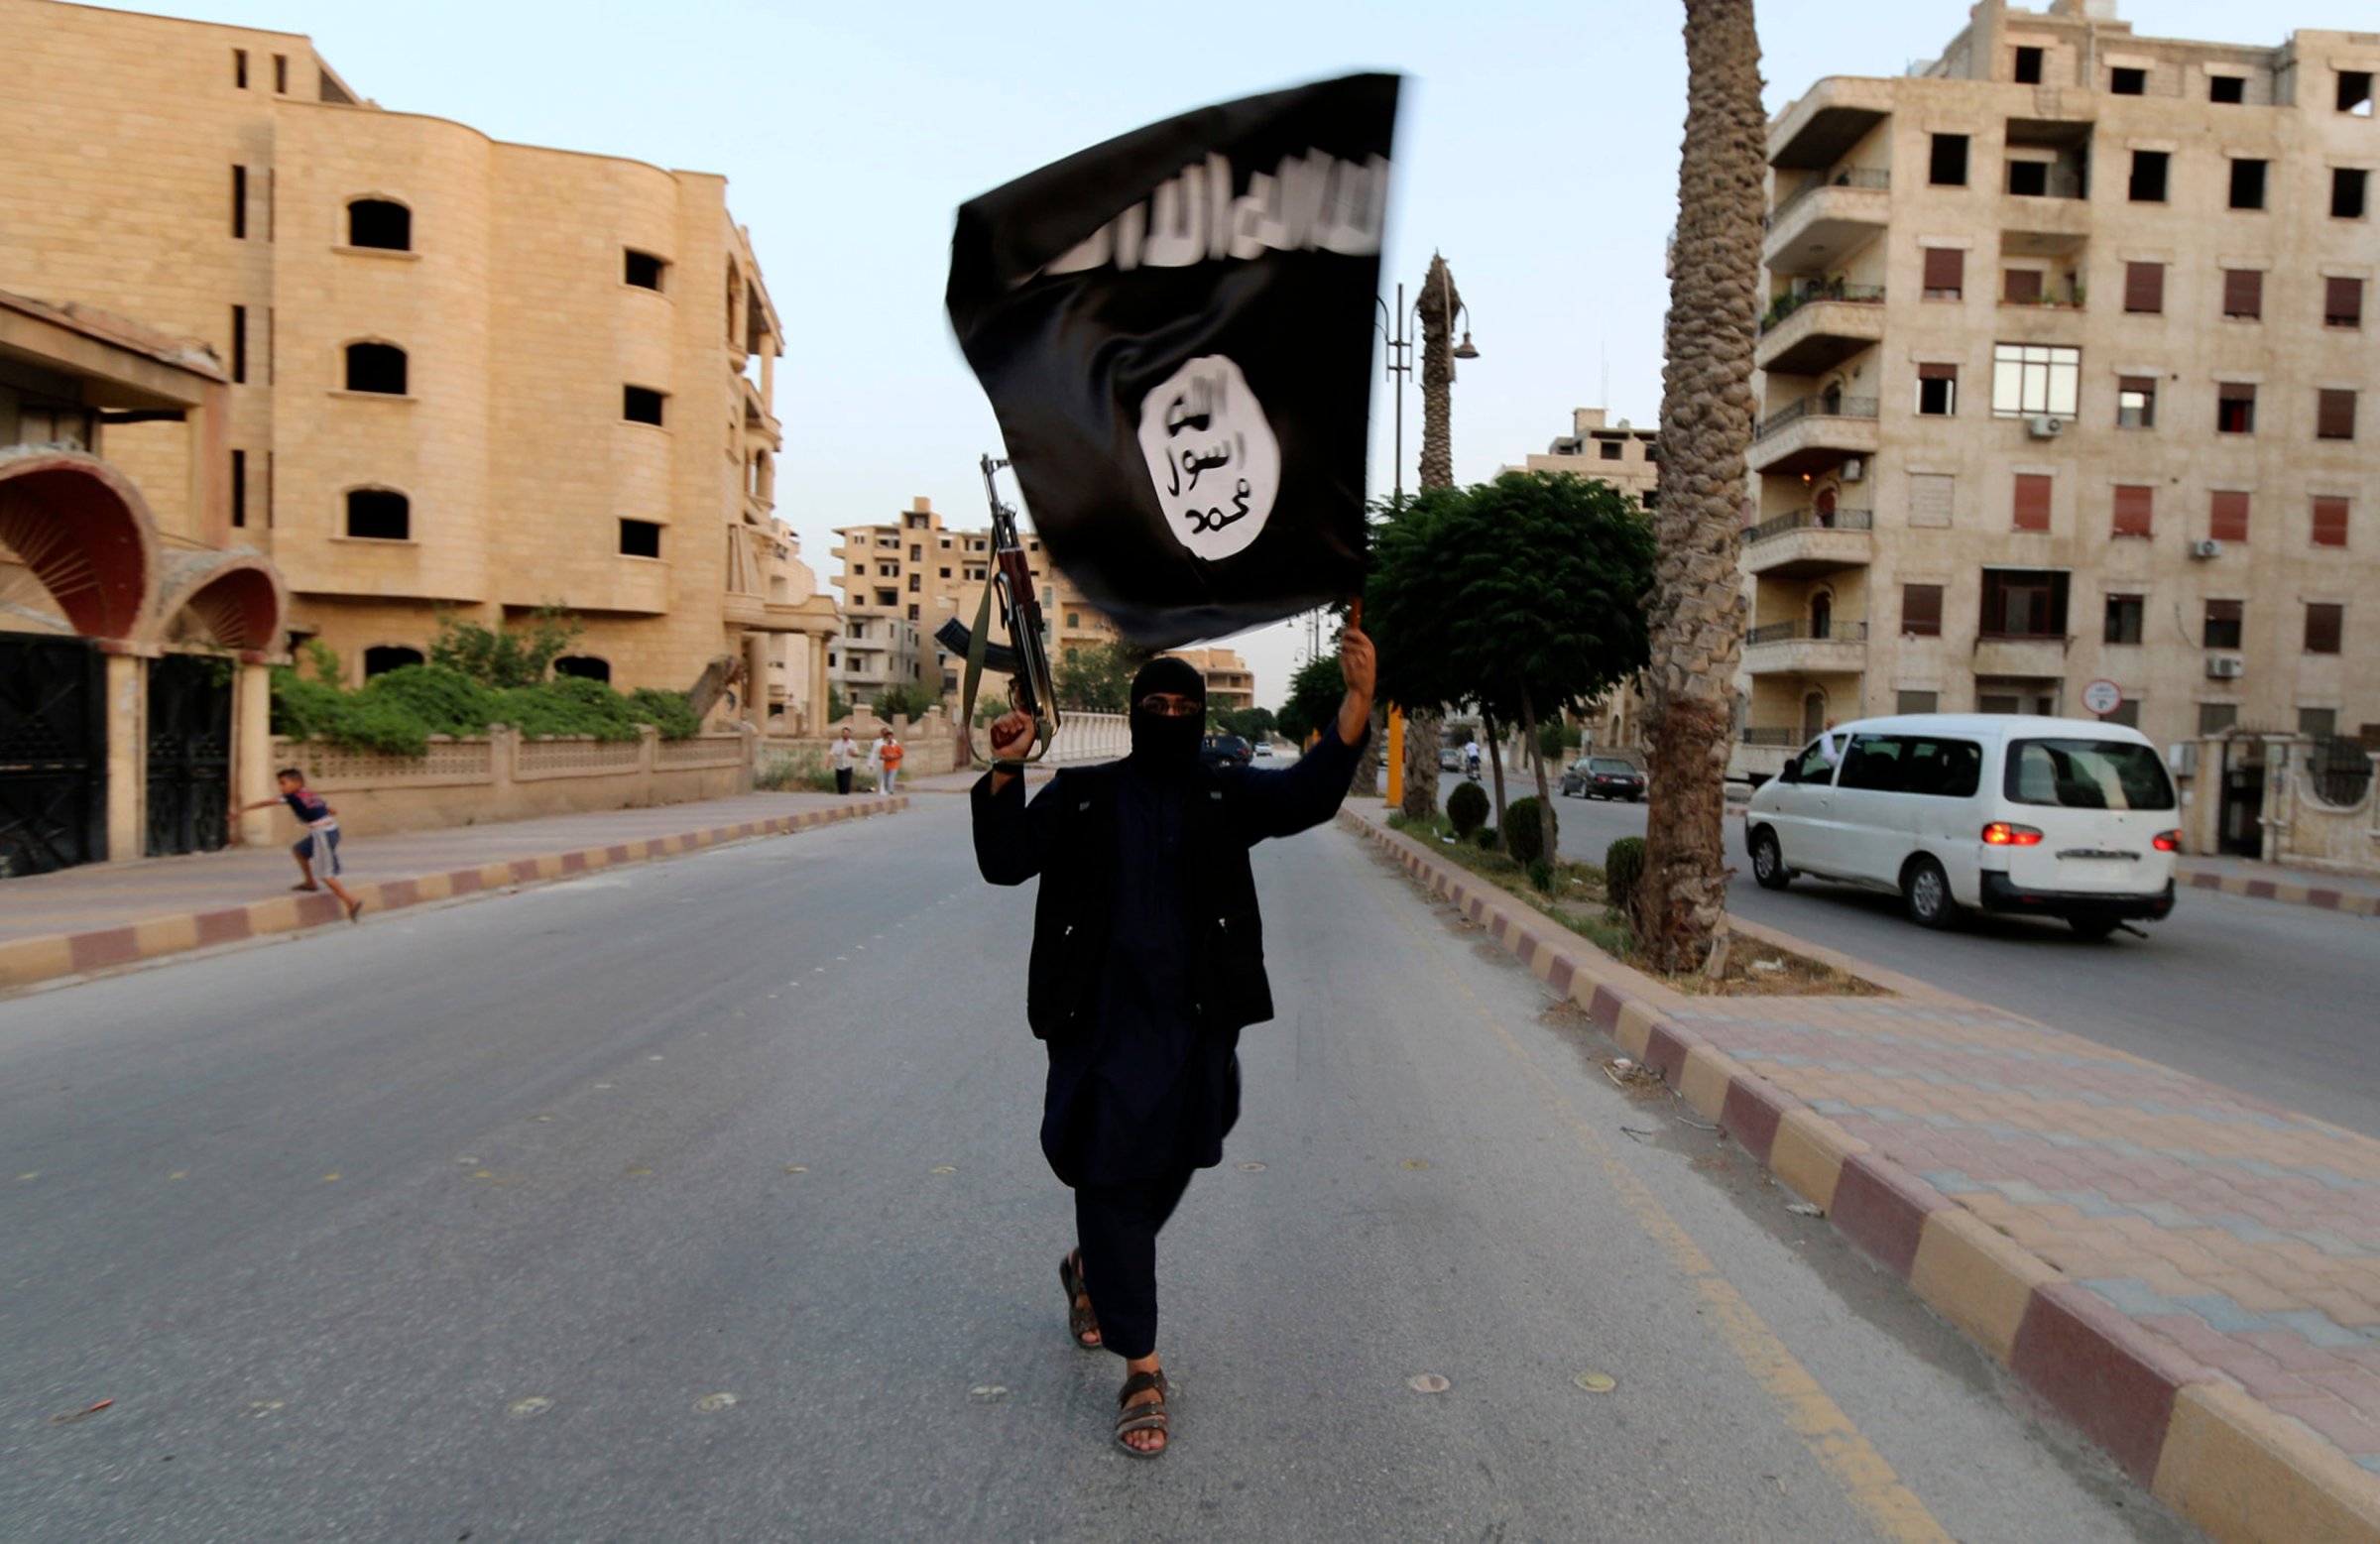 A member loyal to ISIS waves their flag in Raqqa, Syria, on June 29, 2014.